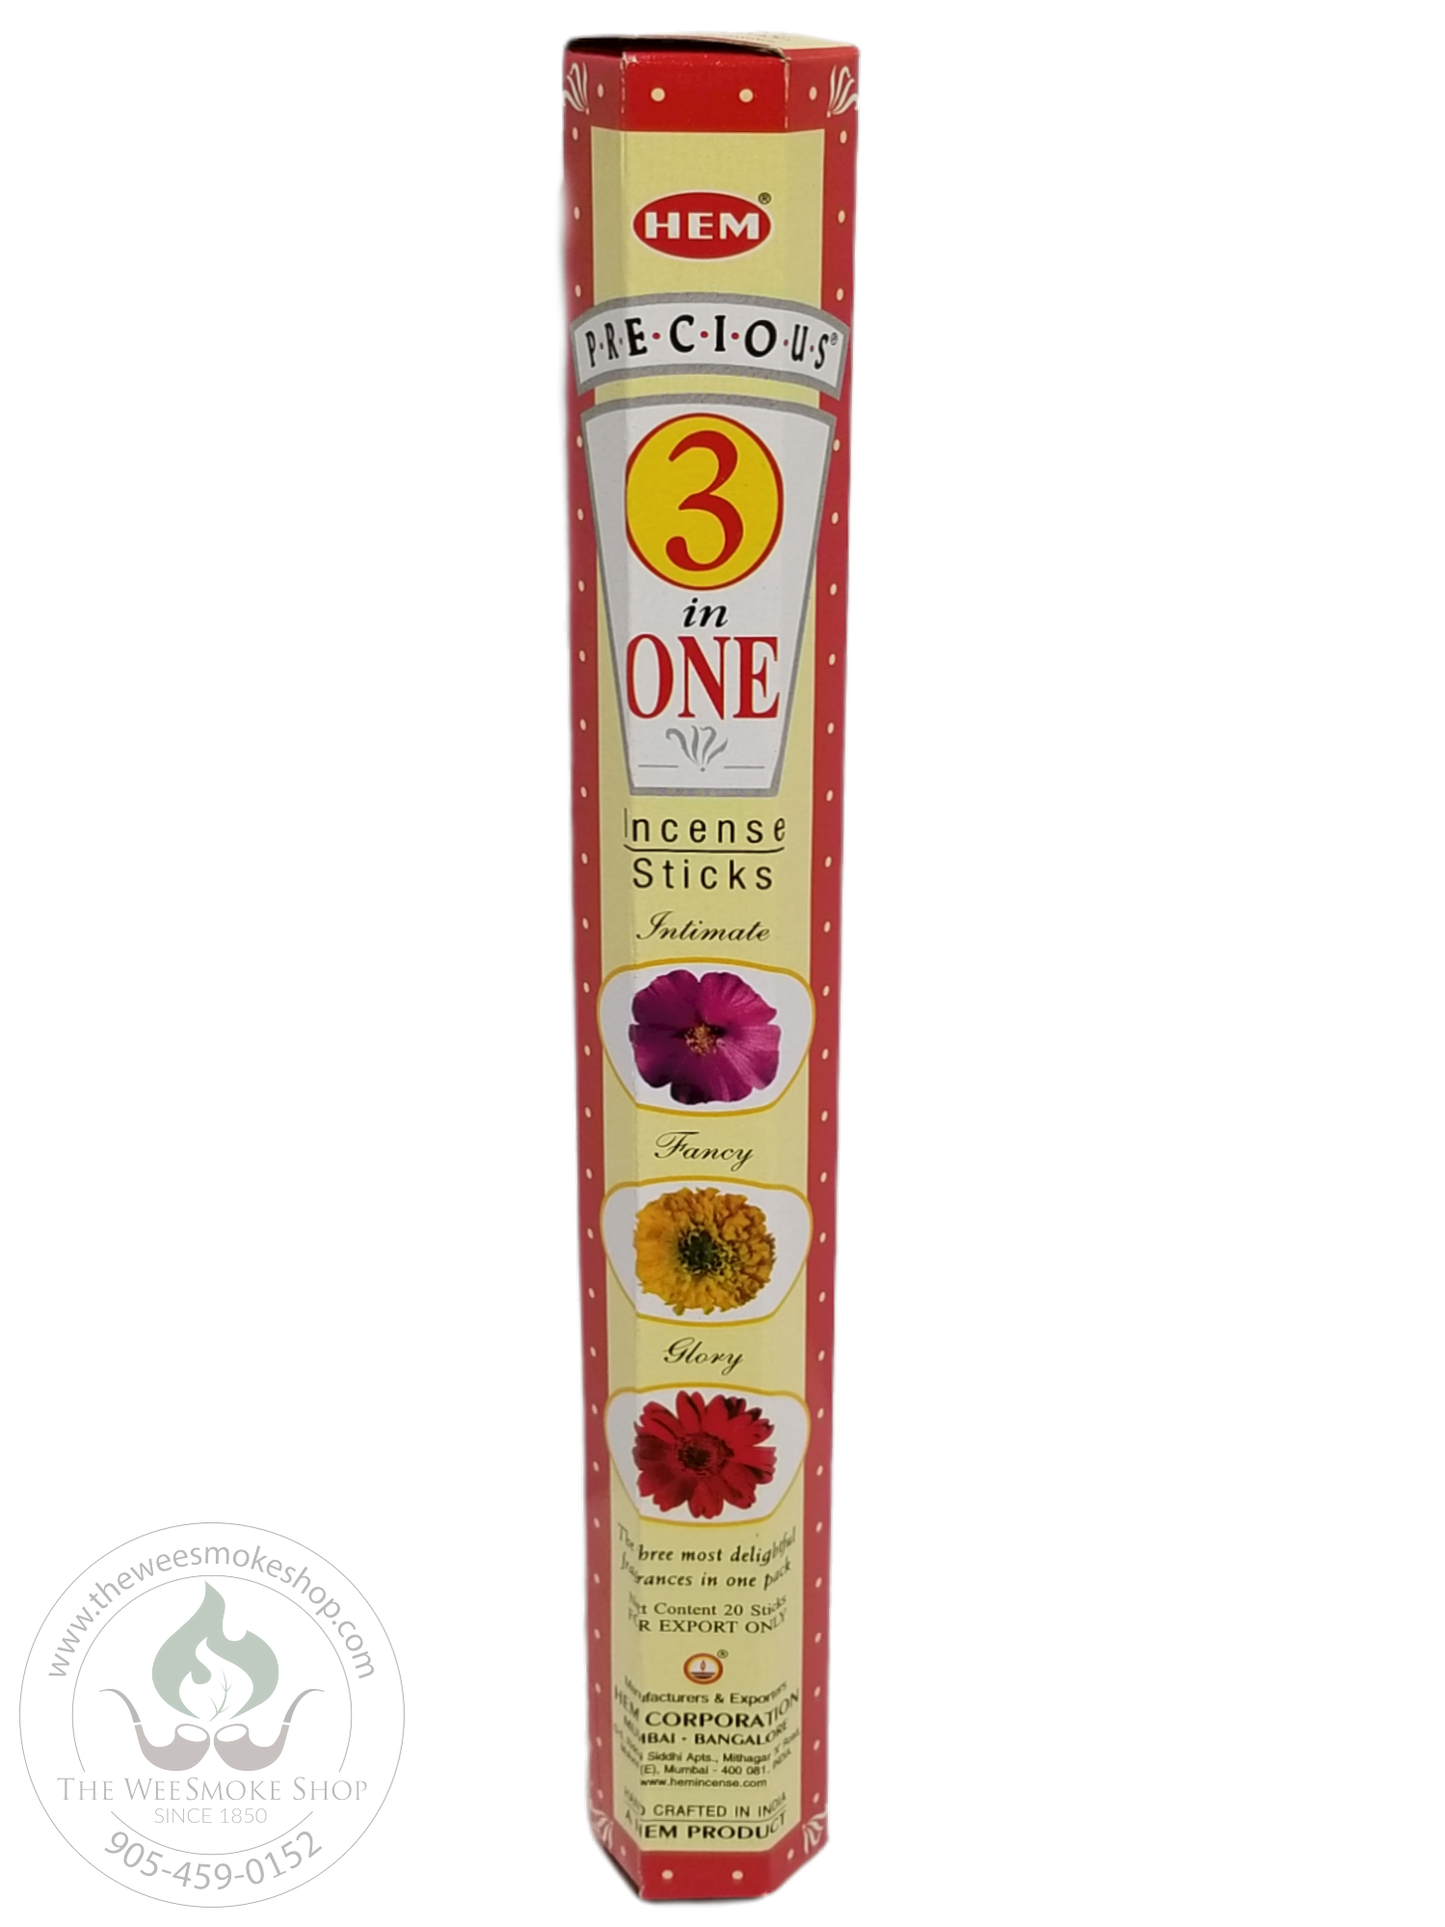 Hem Incense Sticks-3 in One--incense-The Wee Smoke Shop